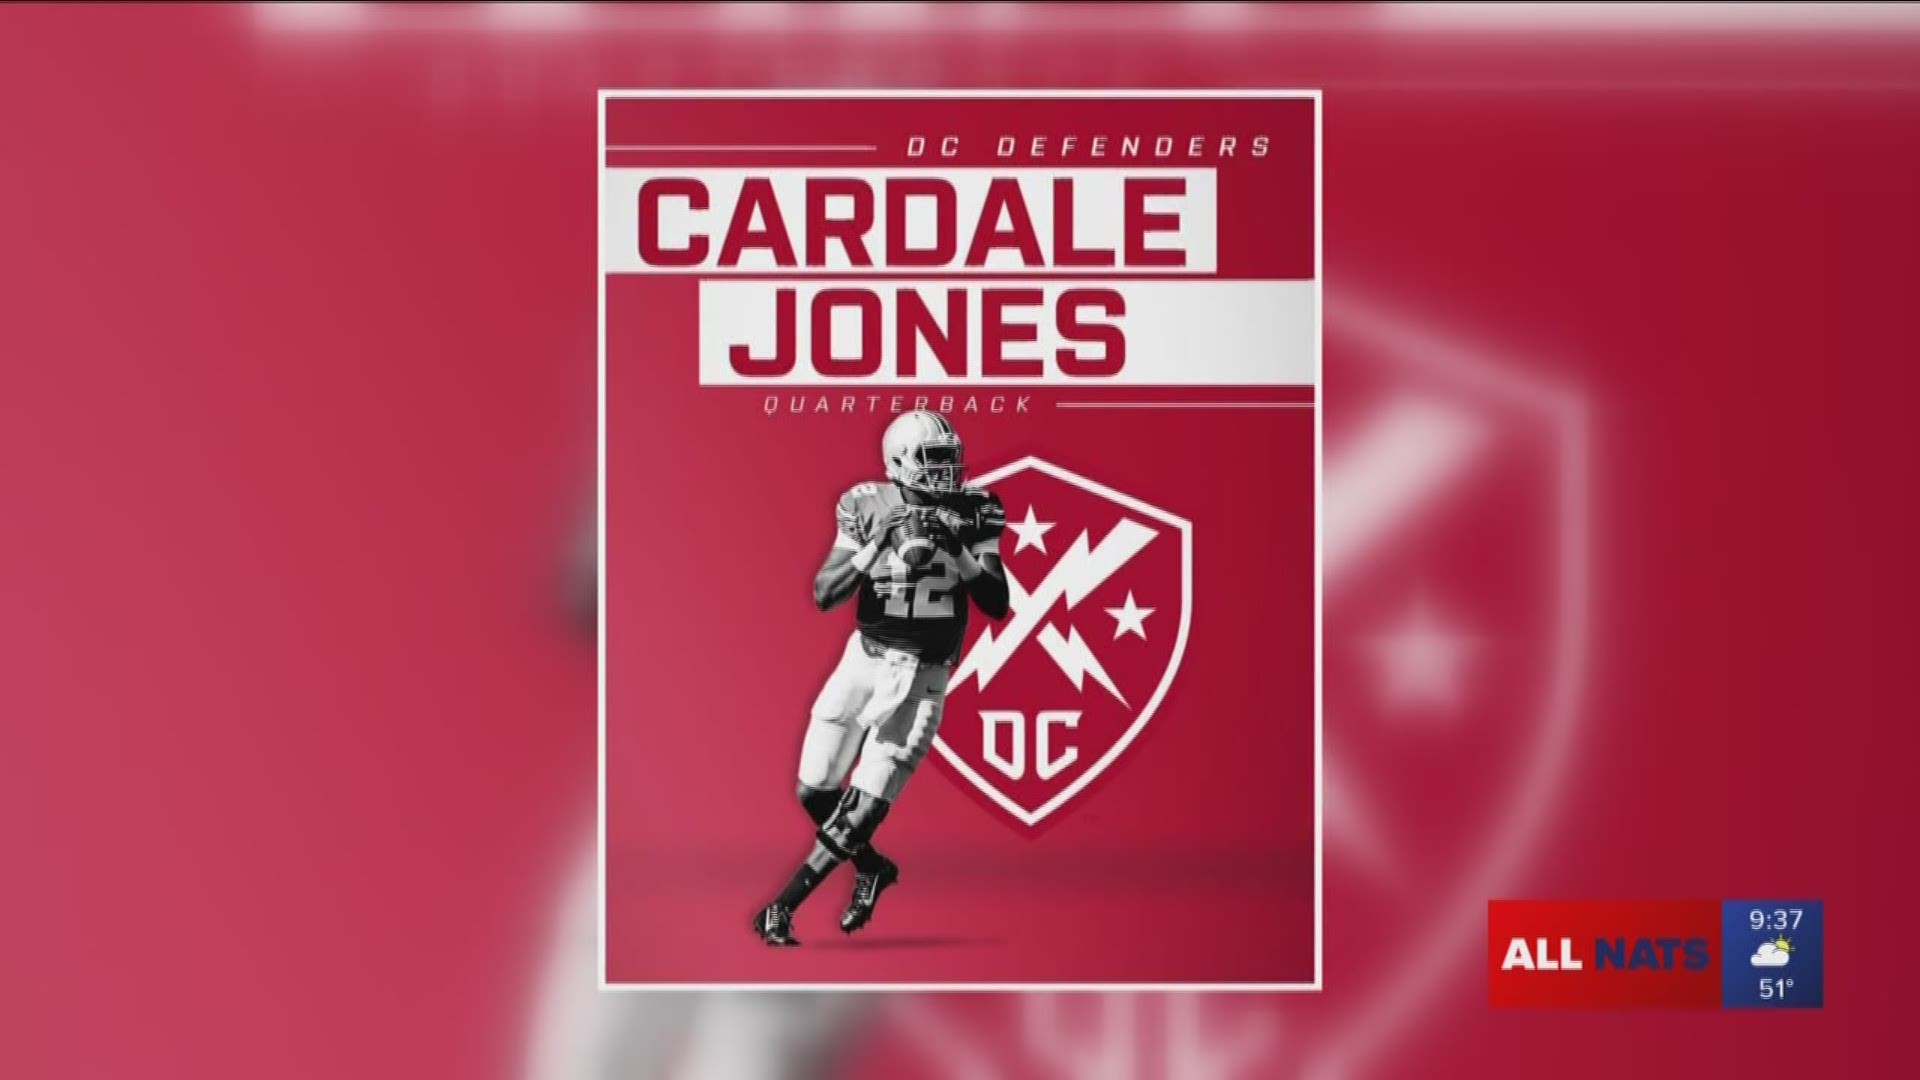 Cardale Jones was just announced as the XFL DC Defenders starting quarterback. He talks about adjusting to the DC lifestyle and what fans can expect this December.